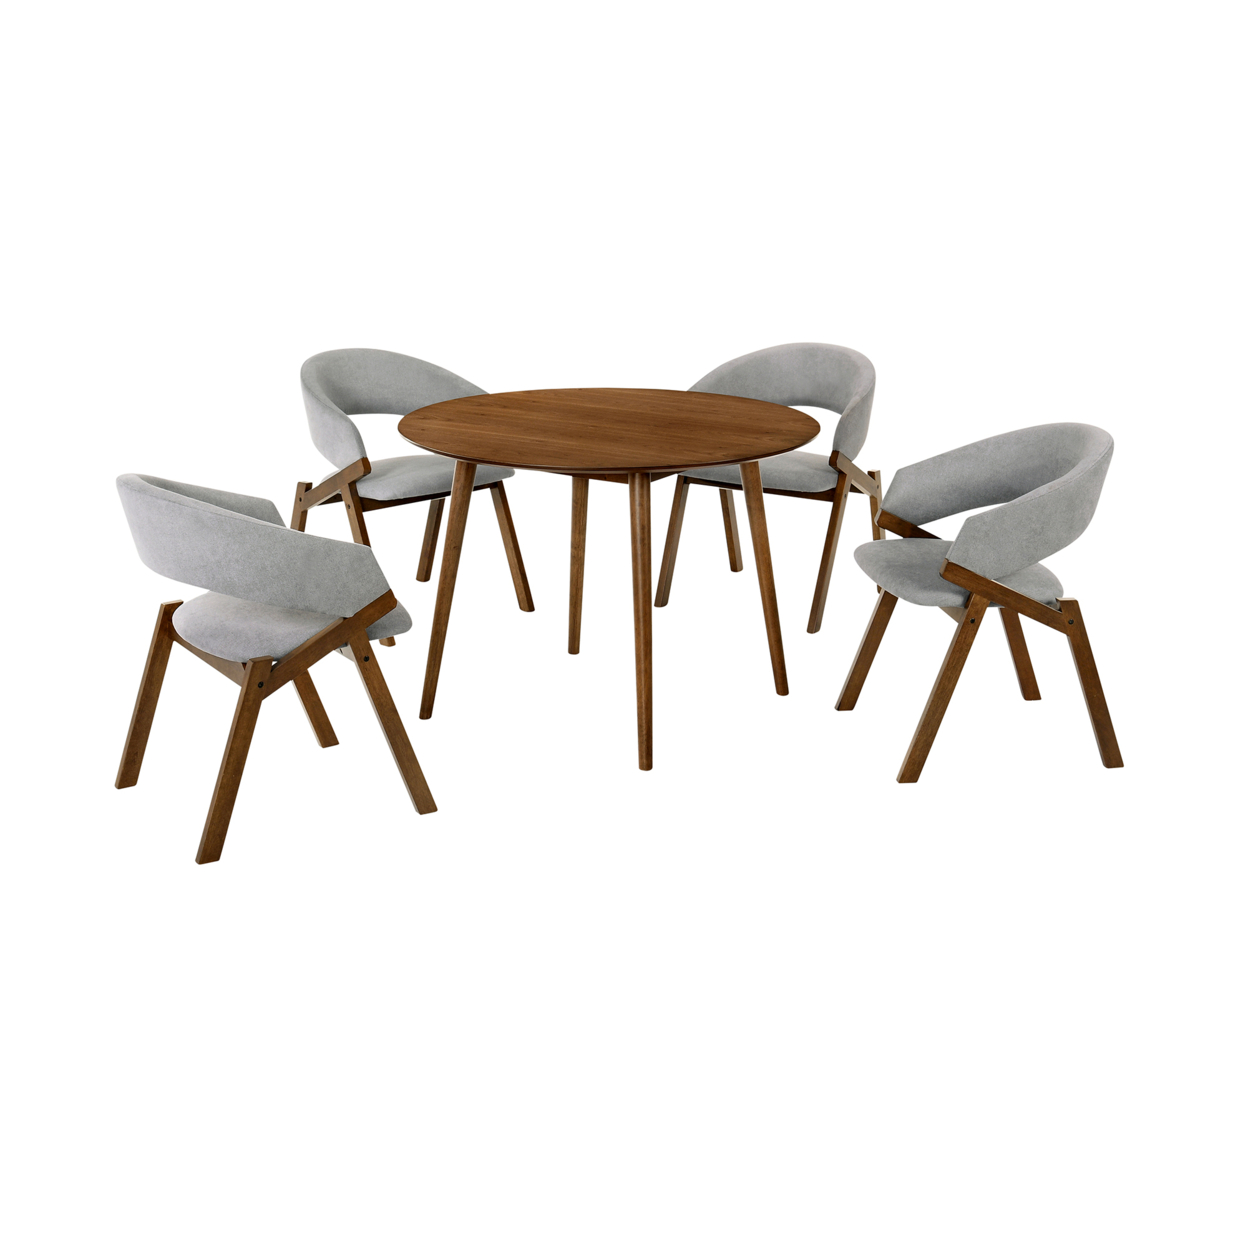 5 Piece Dining Set With Curved Open Fabric Side Chair, Brown And Gray- Saltoro Sherpi